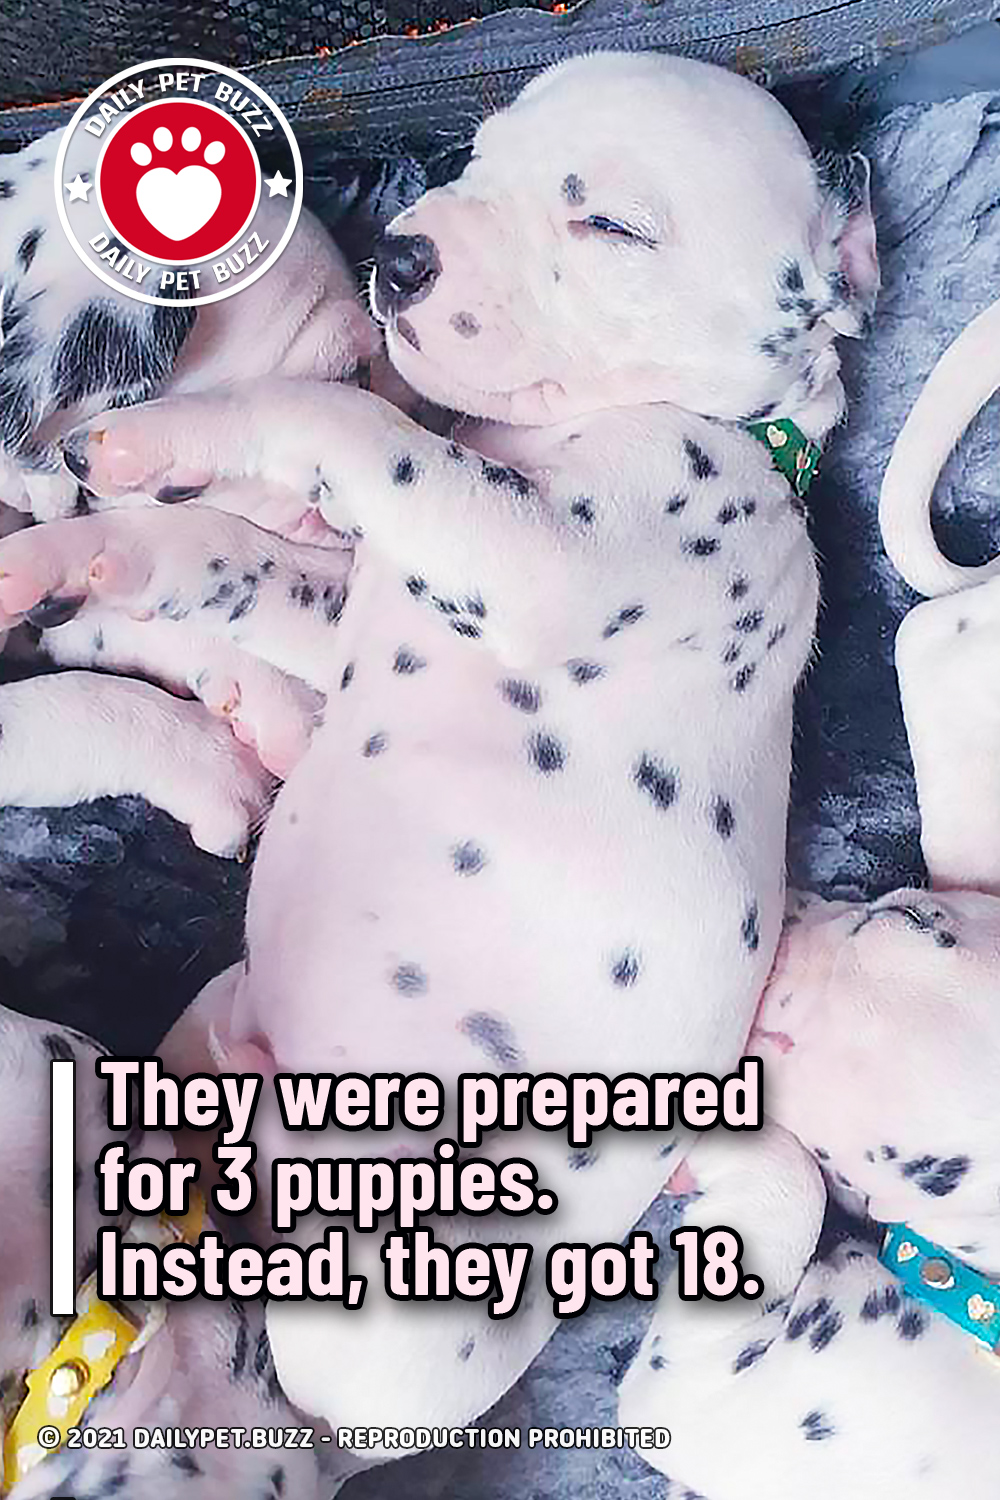 They were prepared for 3 puppies. Instead, they got 18.